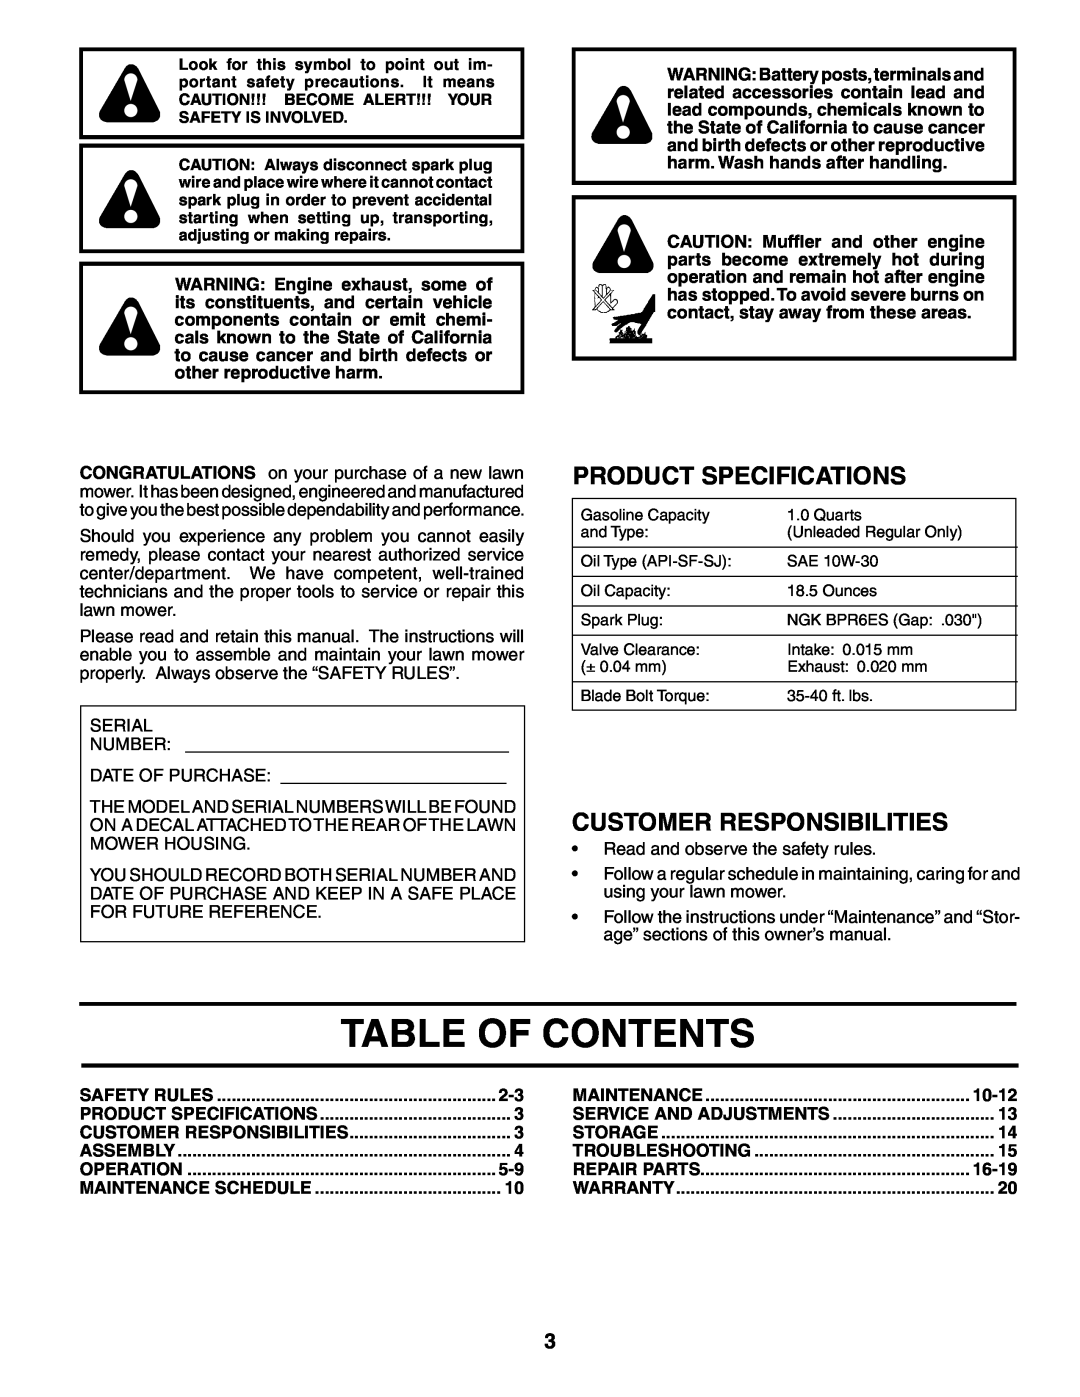 Husqvarna 5521CHV owner manual Table Of Contents, Product Specifications, Customer Responsibilities, 10-12, 16-19 